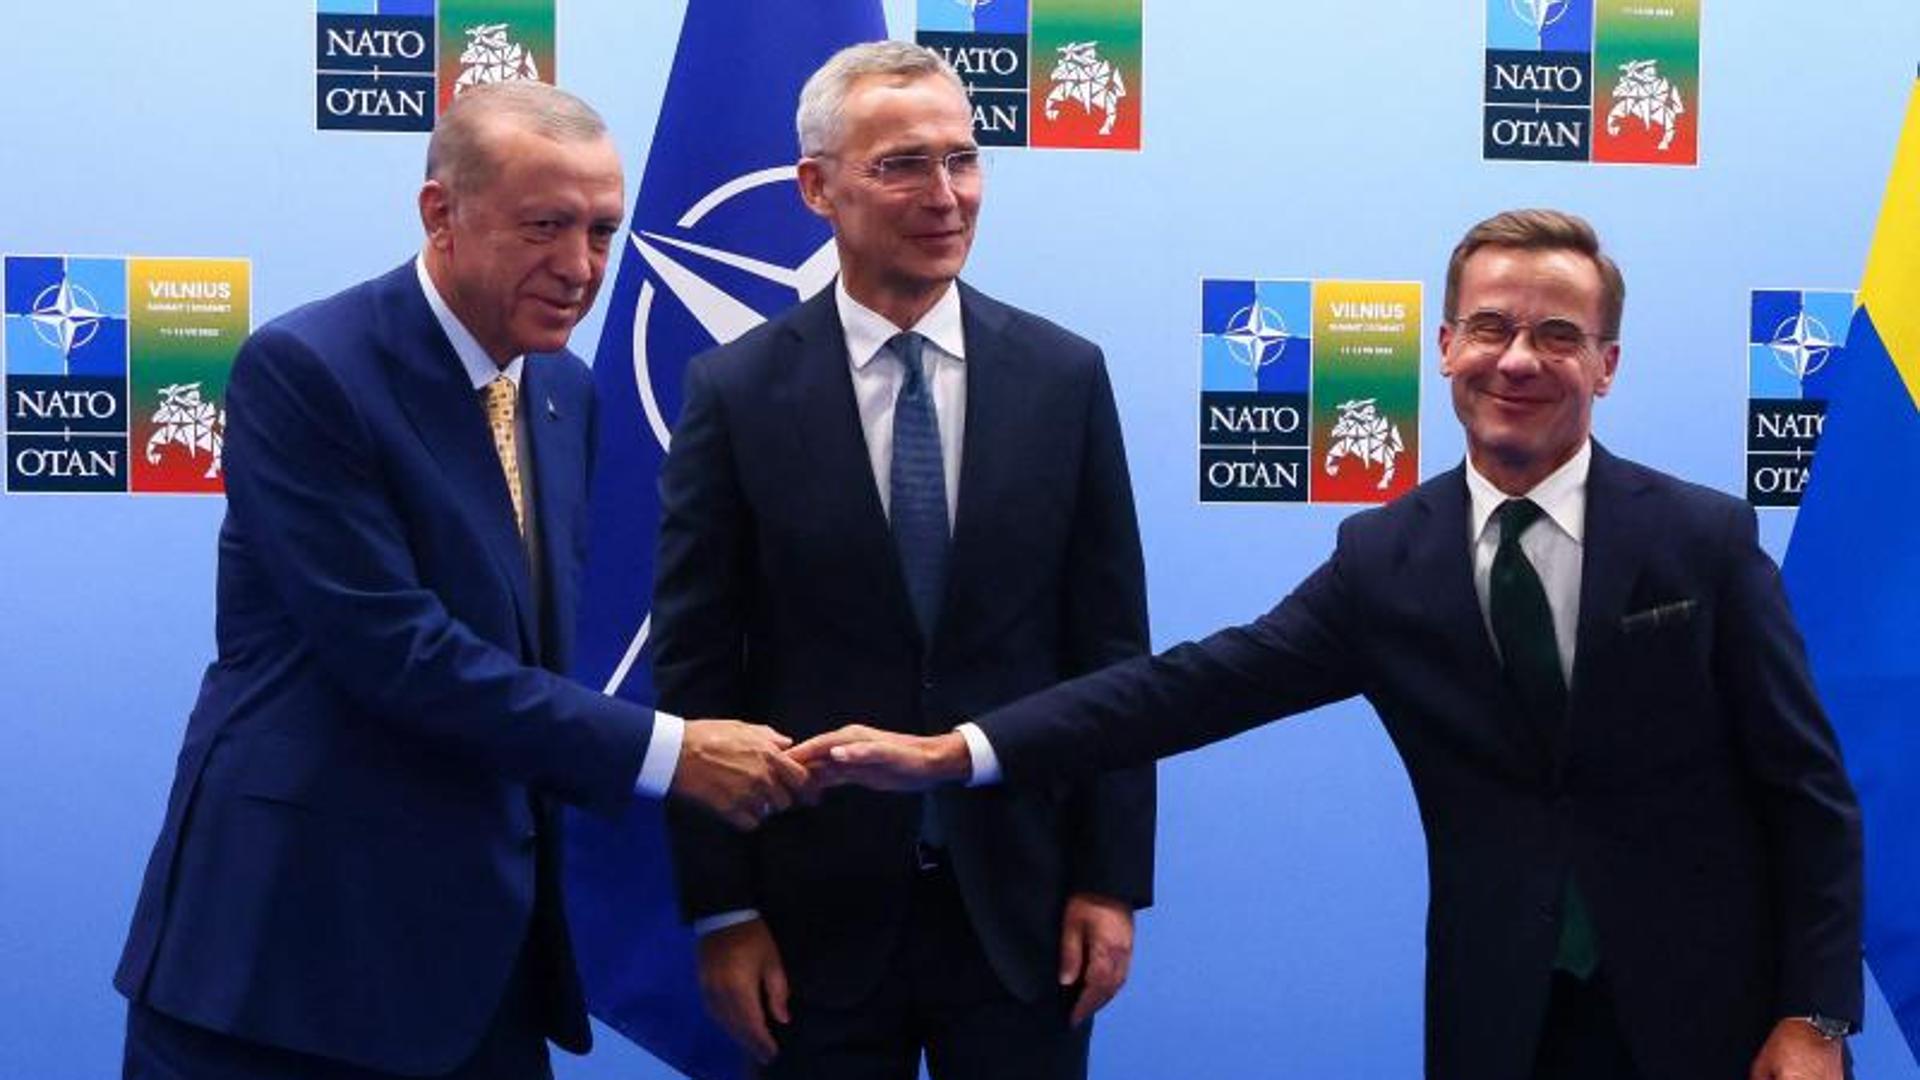 Turkey yields to pressure and withdraws its veto on Sweden’s entry into NATO